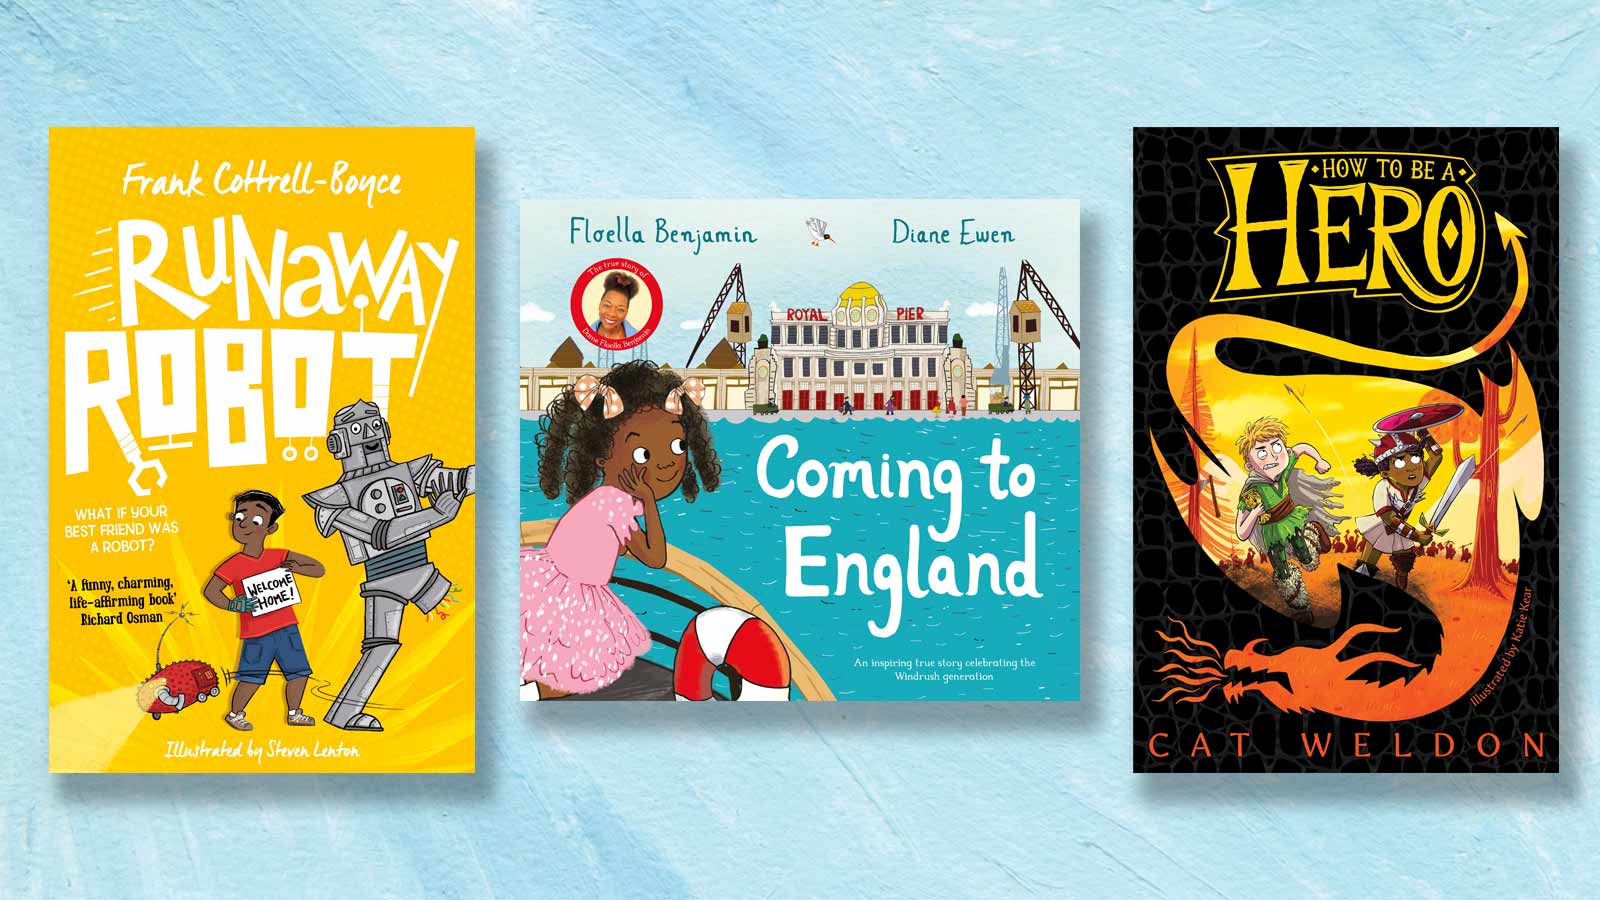 Runaway Robot, Coming to England and How to Be a Hero book covers